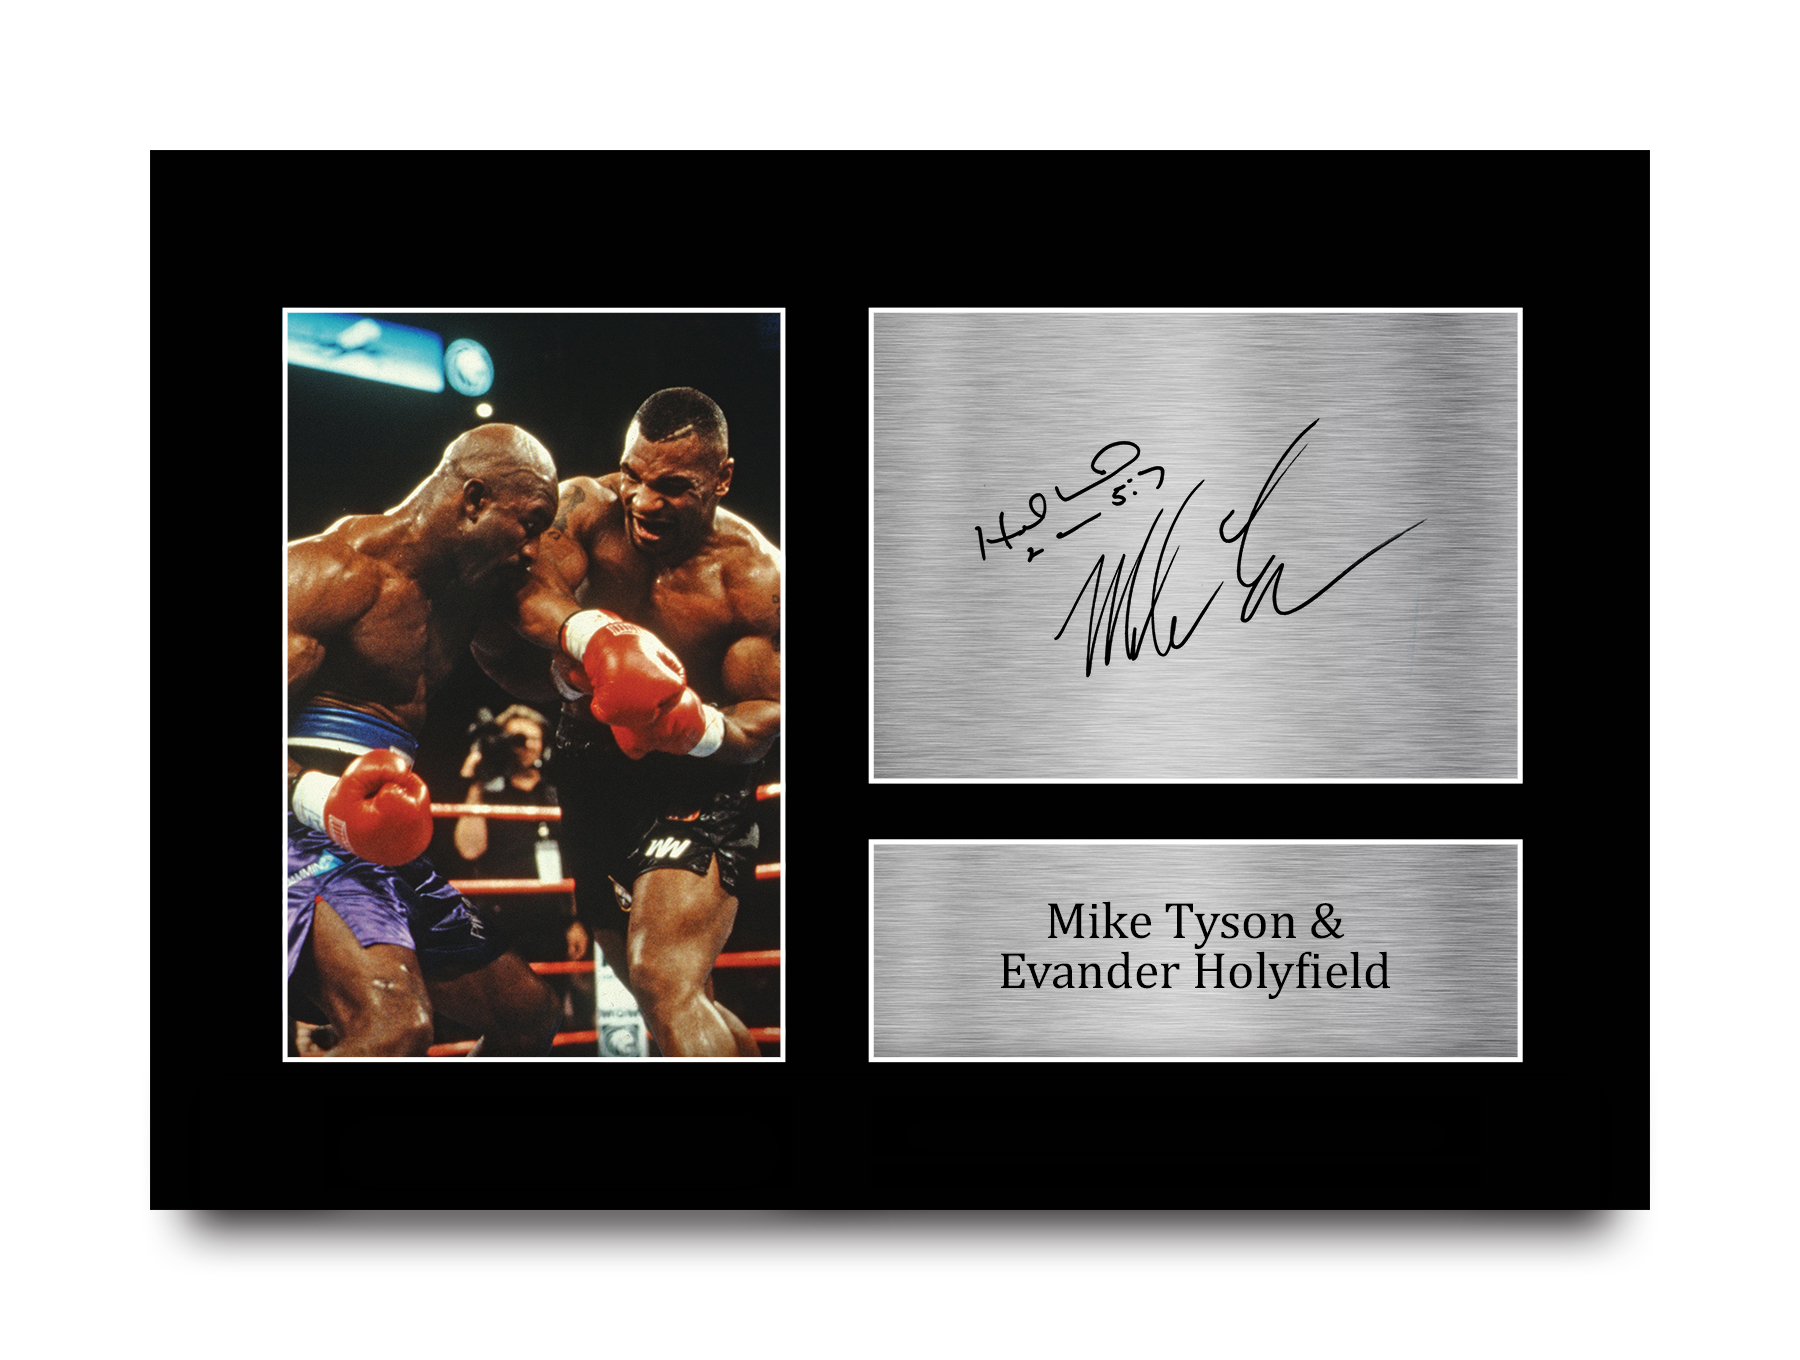 EVANDER HOLYFIELD & MIKE TYSON SIGNED PHOTO PRINT AUTOGRAPH BOXING 